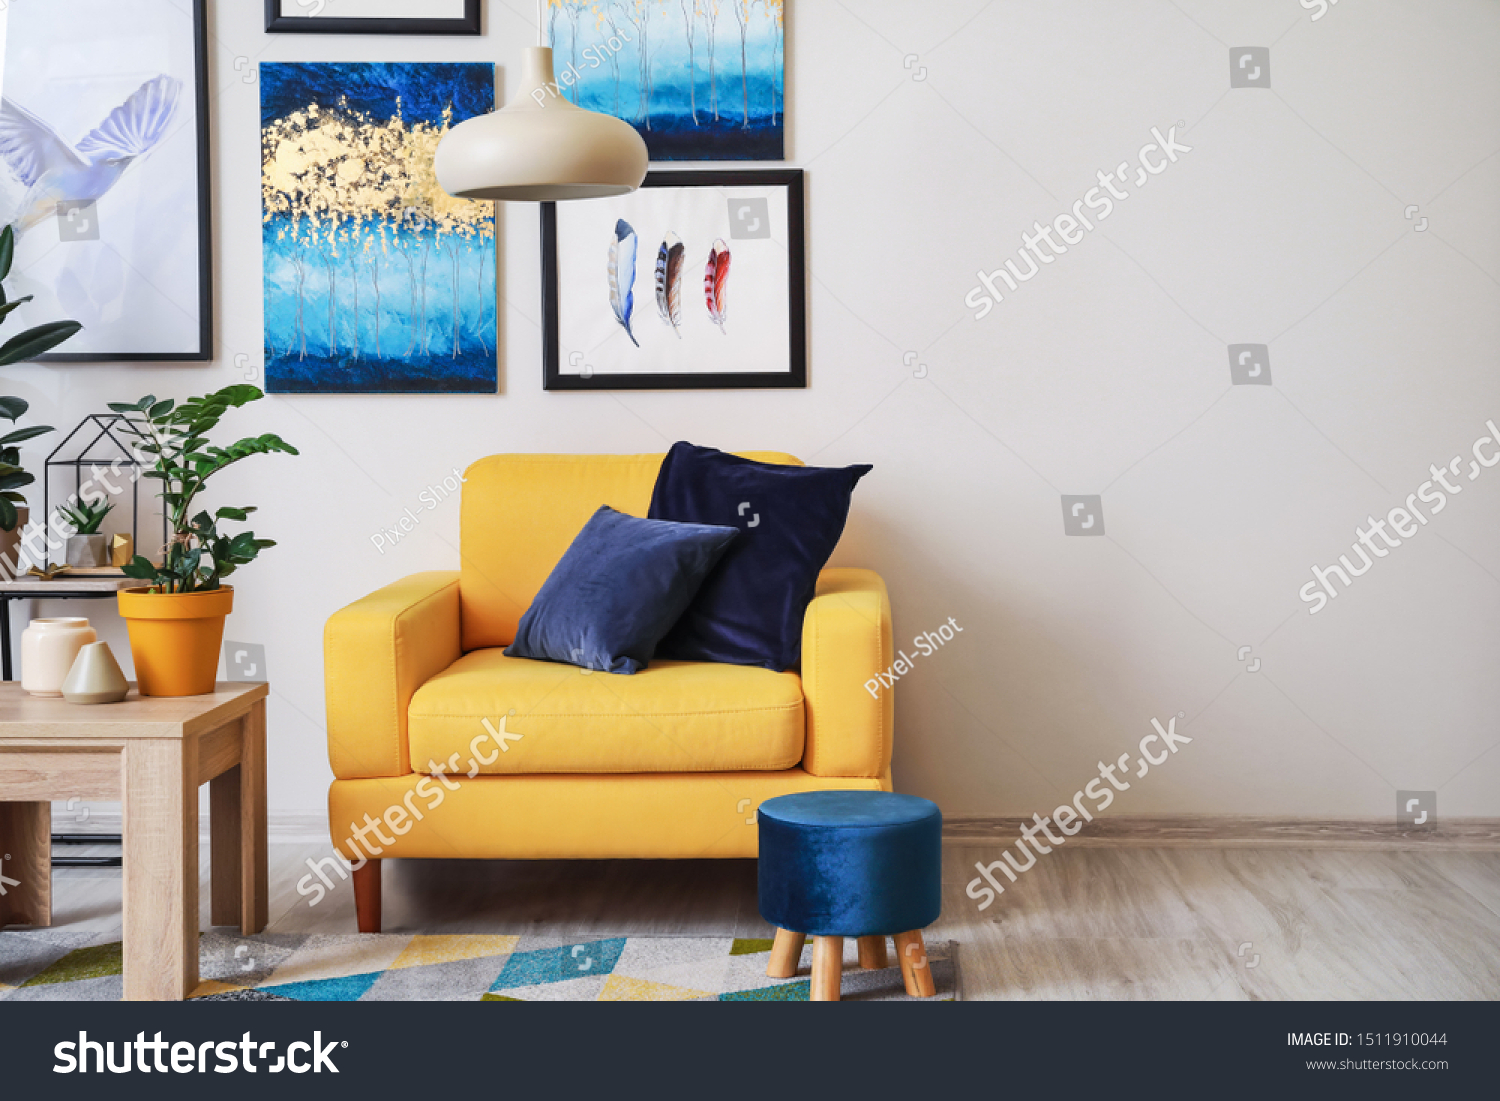 Stylish interior of living room with yellow armchair #1511910044